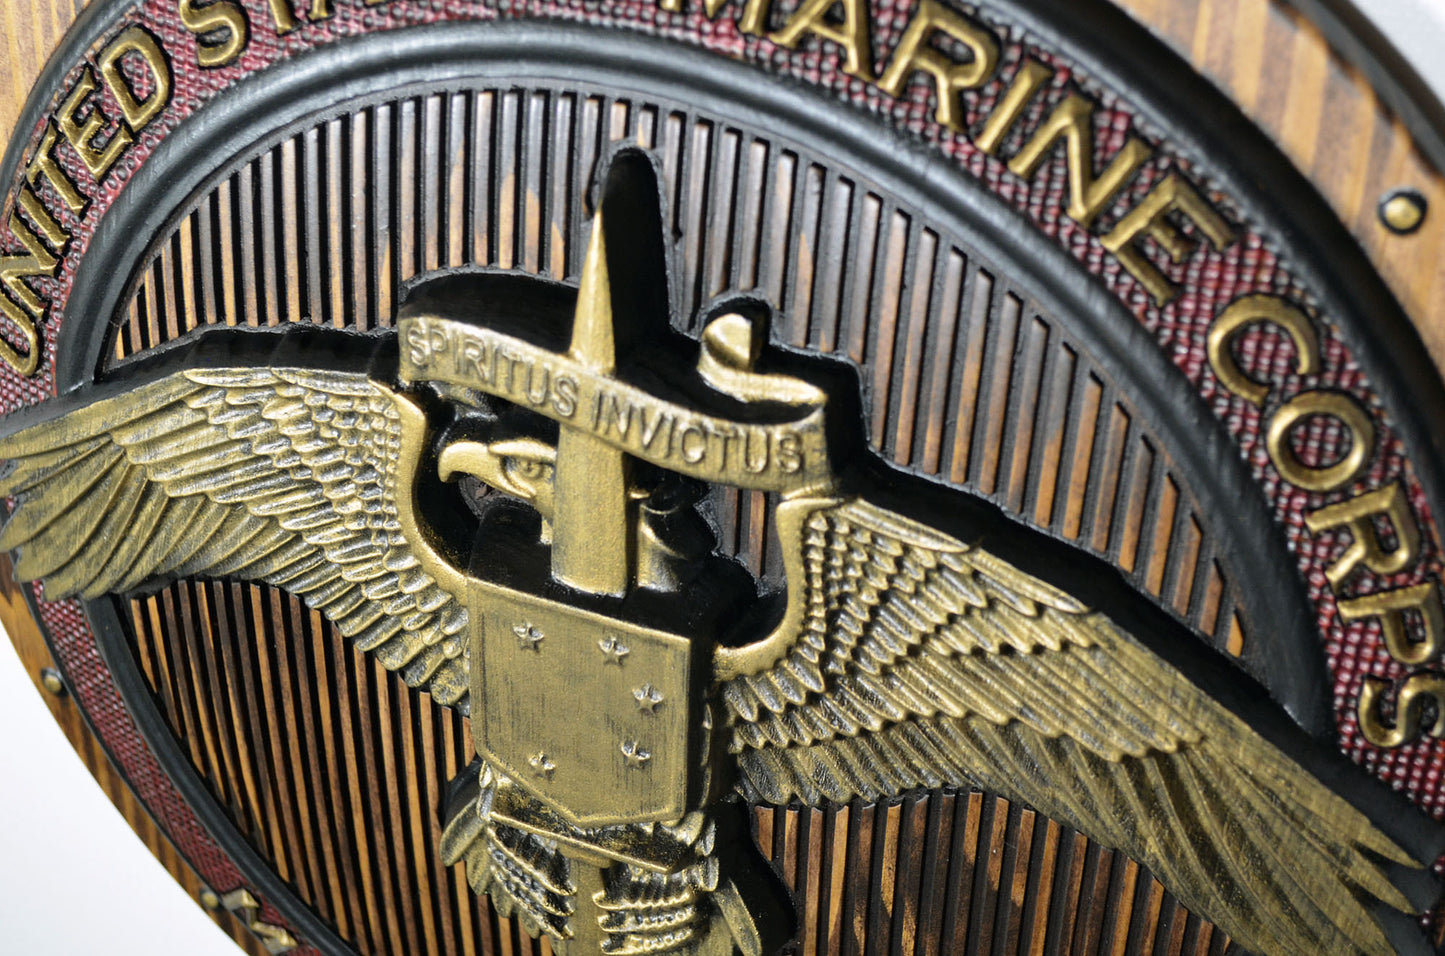 USMC Marine Raiders Badge on Shield, Marine Special Operations, 3d CNC wood carving, painted military plaque